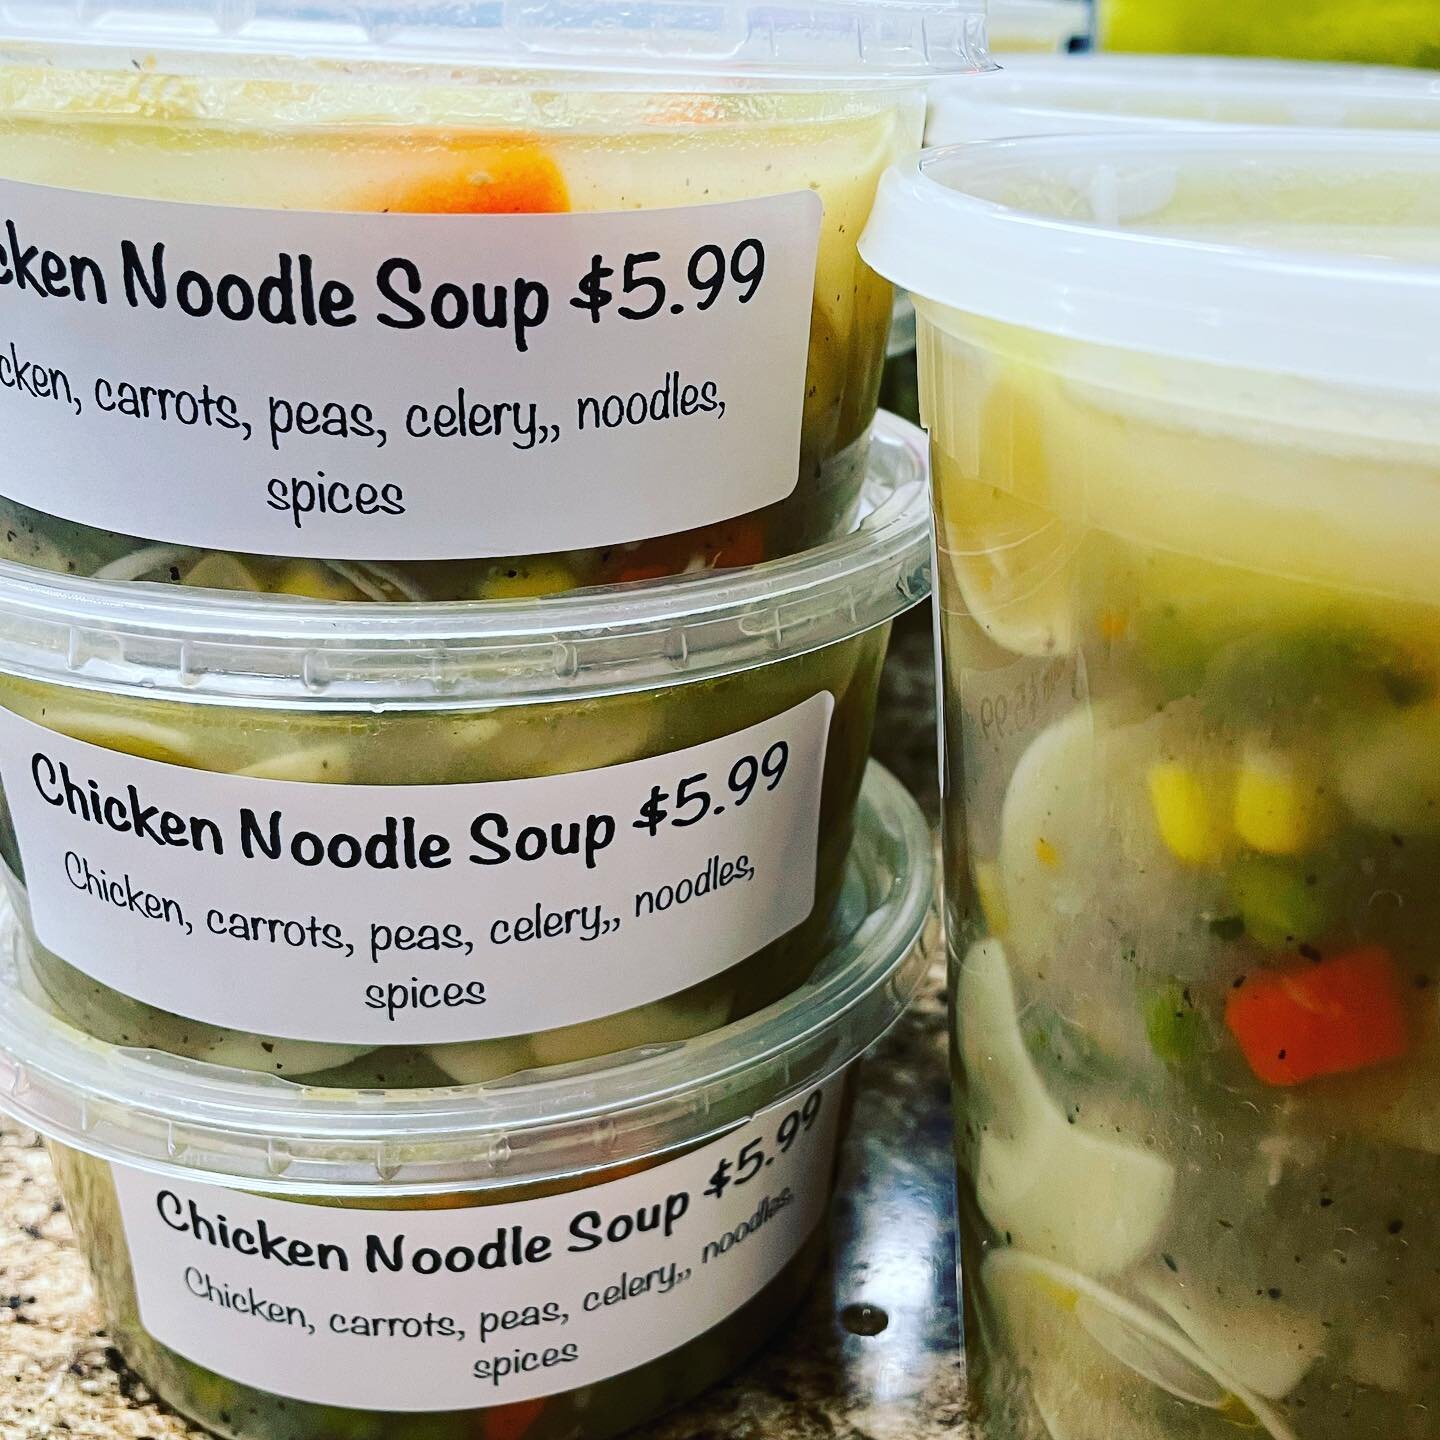 Mommas freshly made chicken noodle soup going in the coolers tonight ! Perfect for this chilly weather 🥶🥶